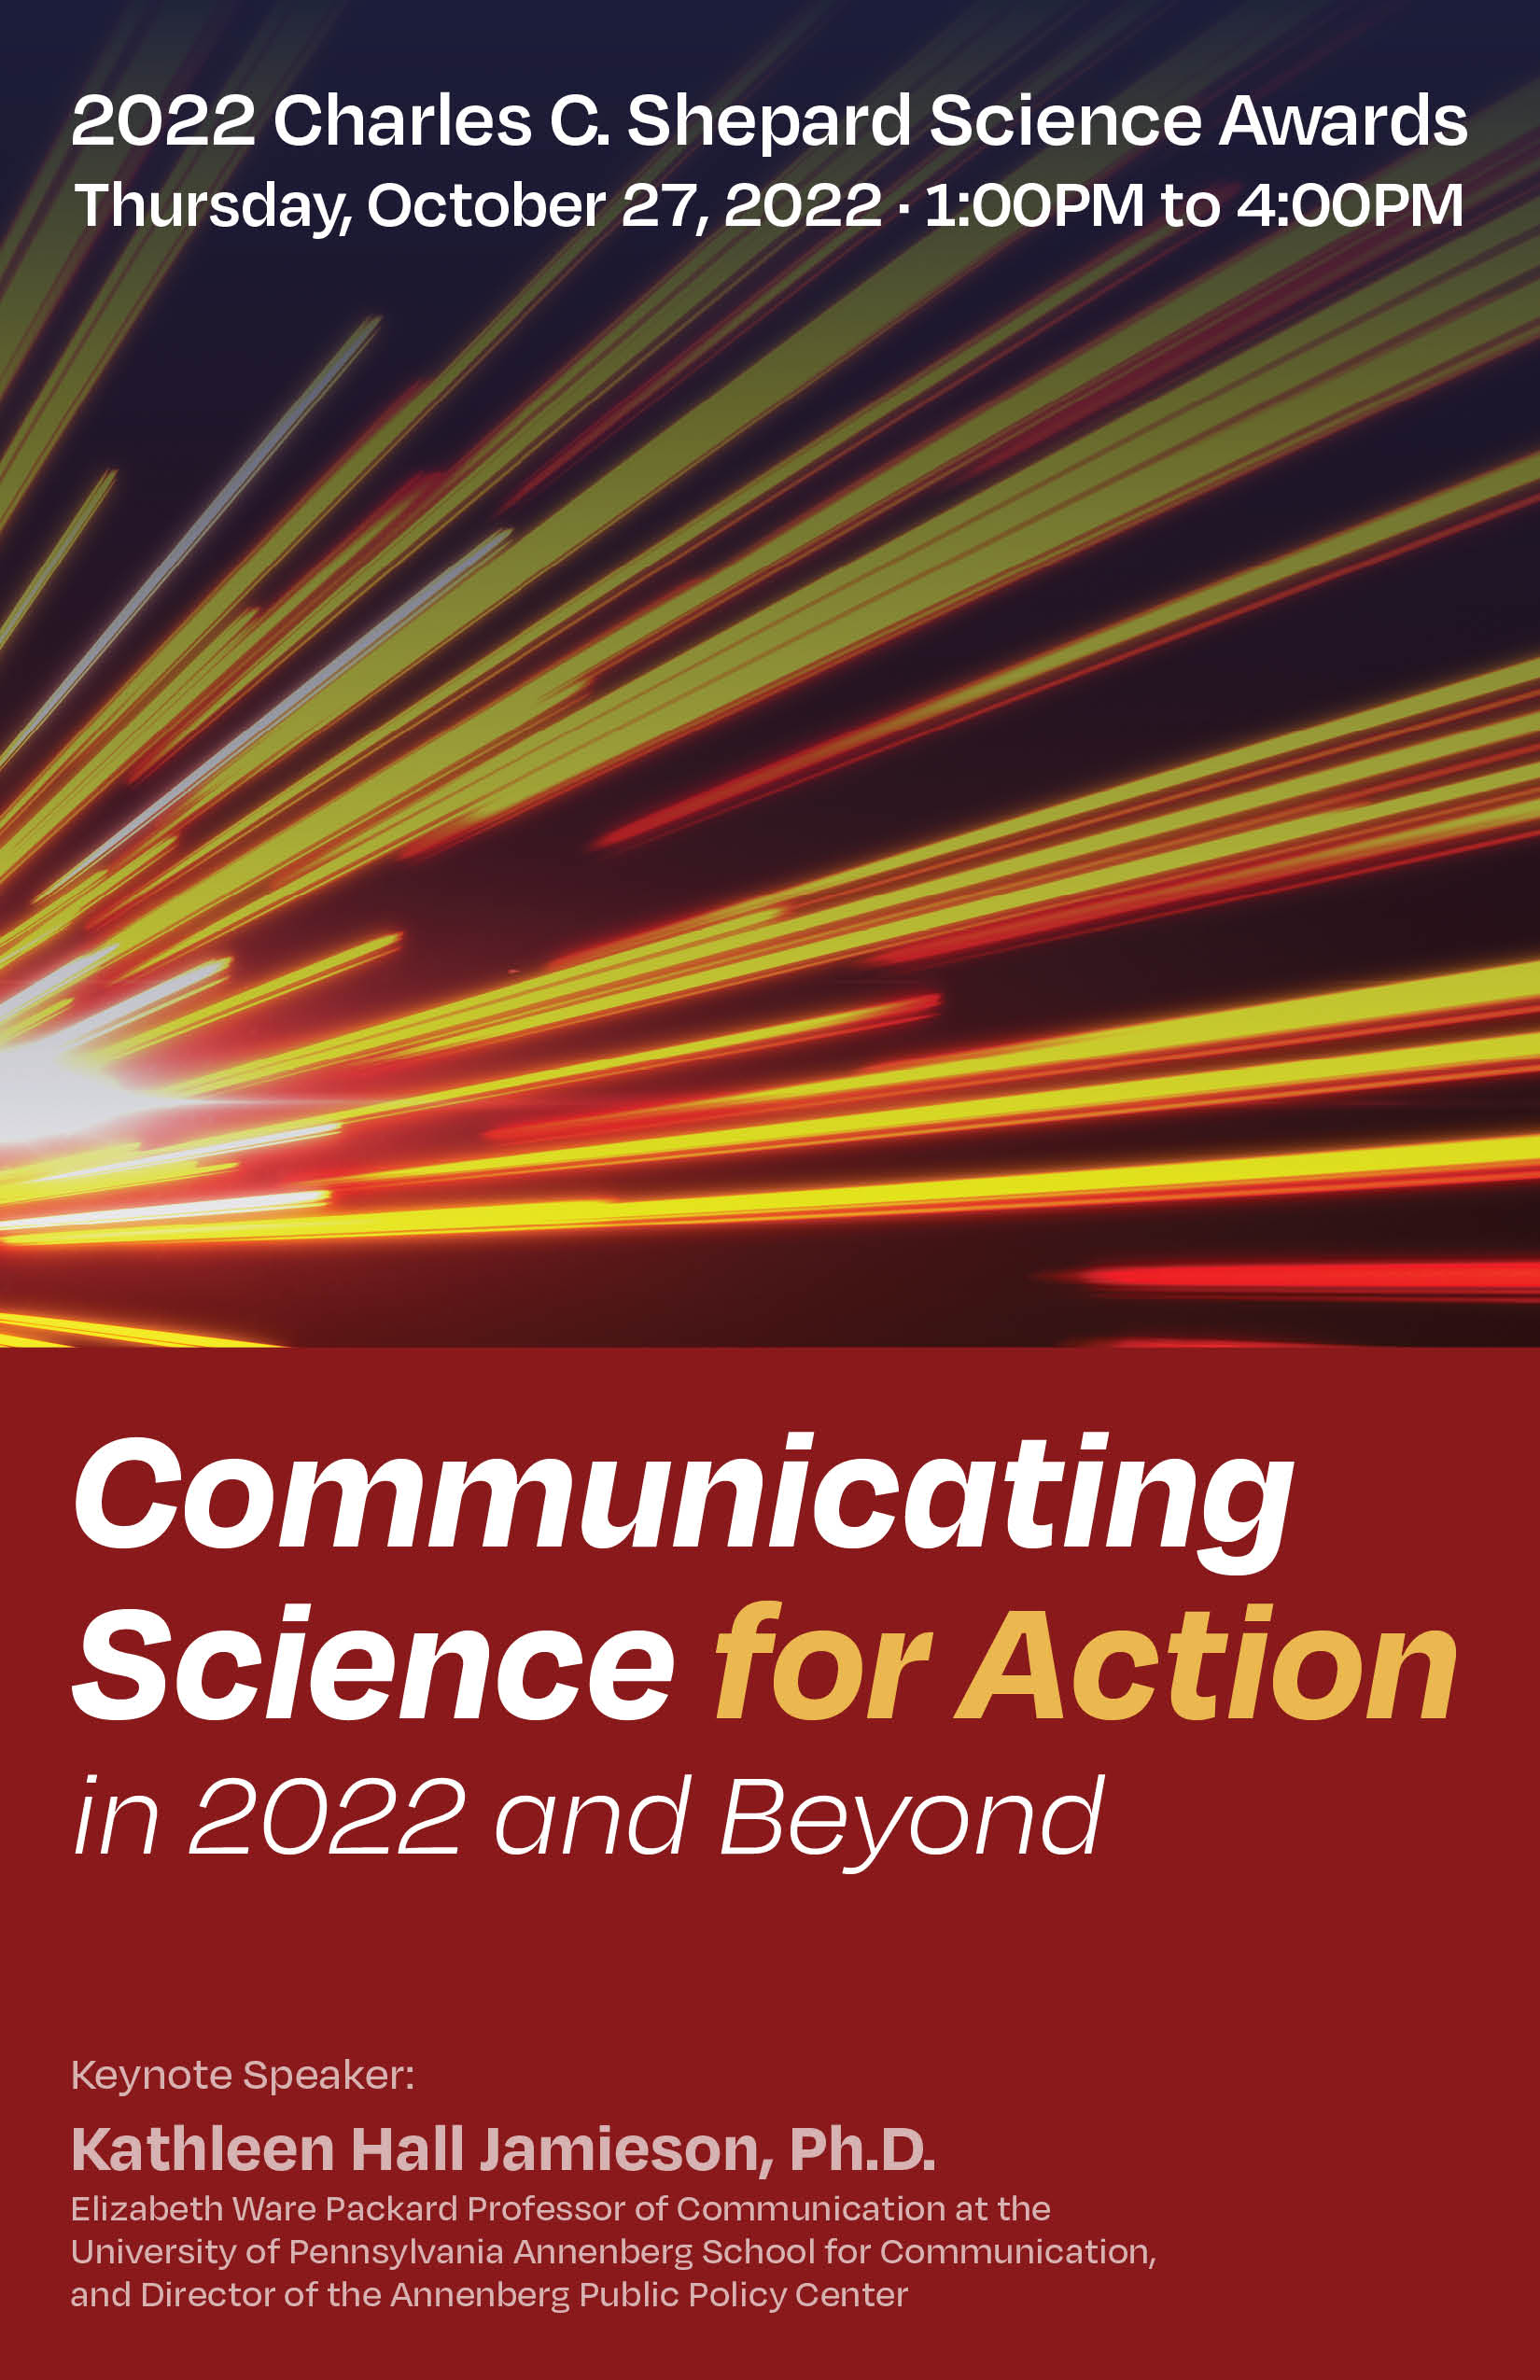 2022 Charles C. Shepard Science Awards booklet cover page. Beams of light coming from the left side with the words “Communicating Science for Action in 2022 and Beyond”.